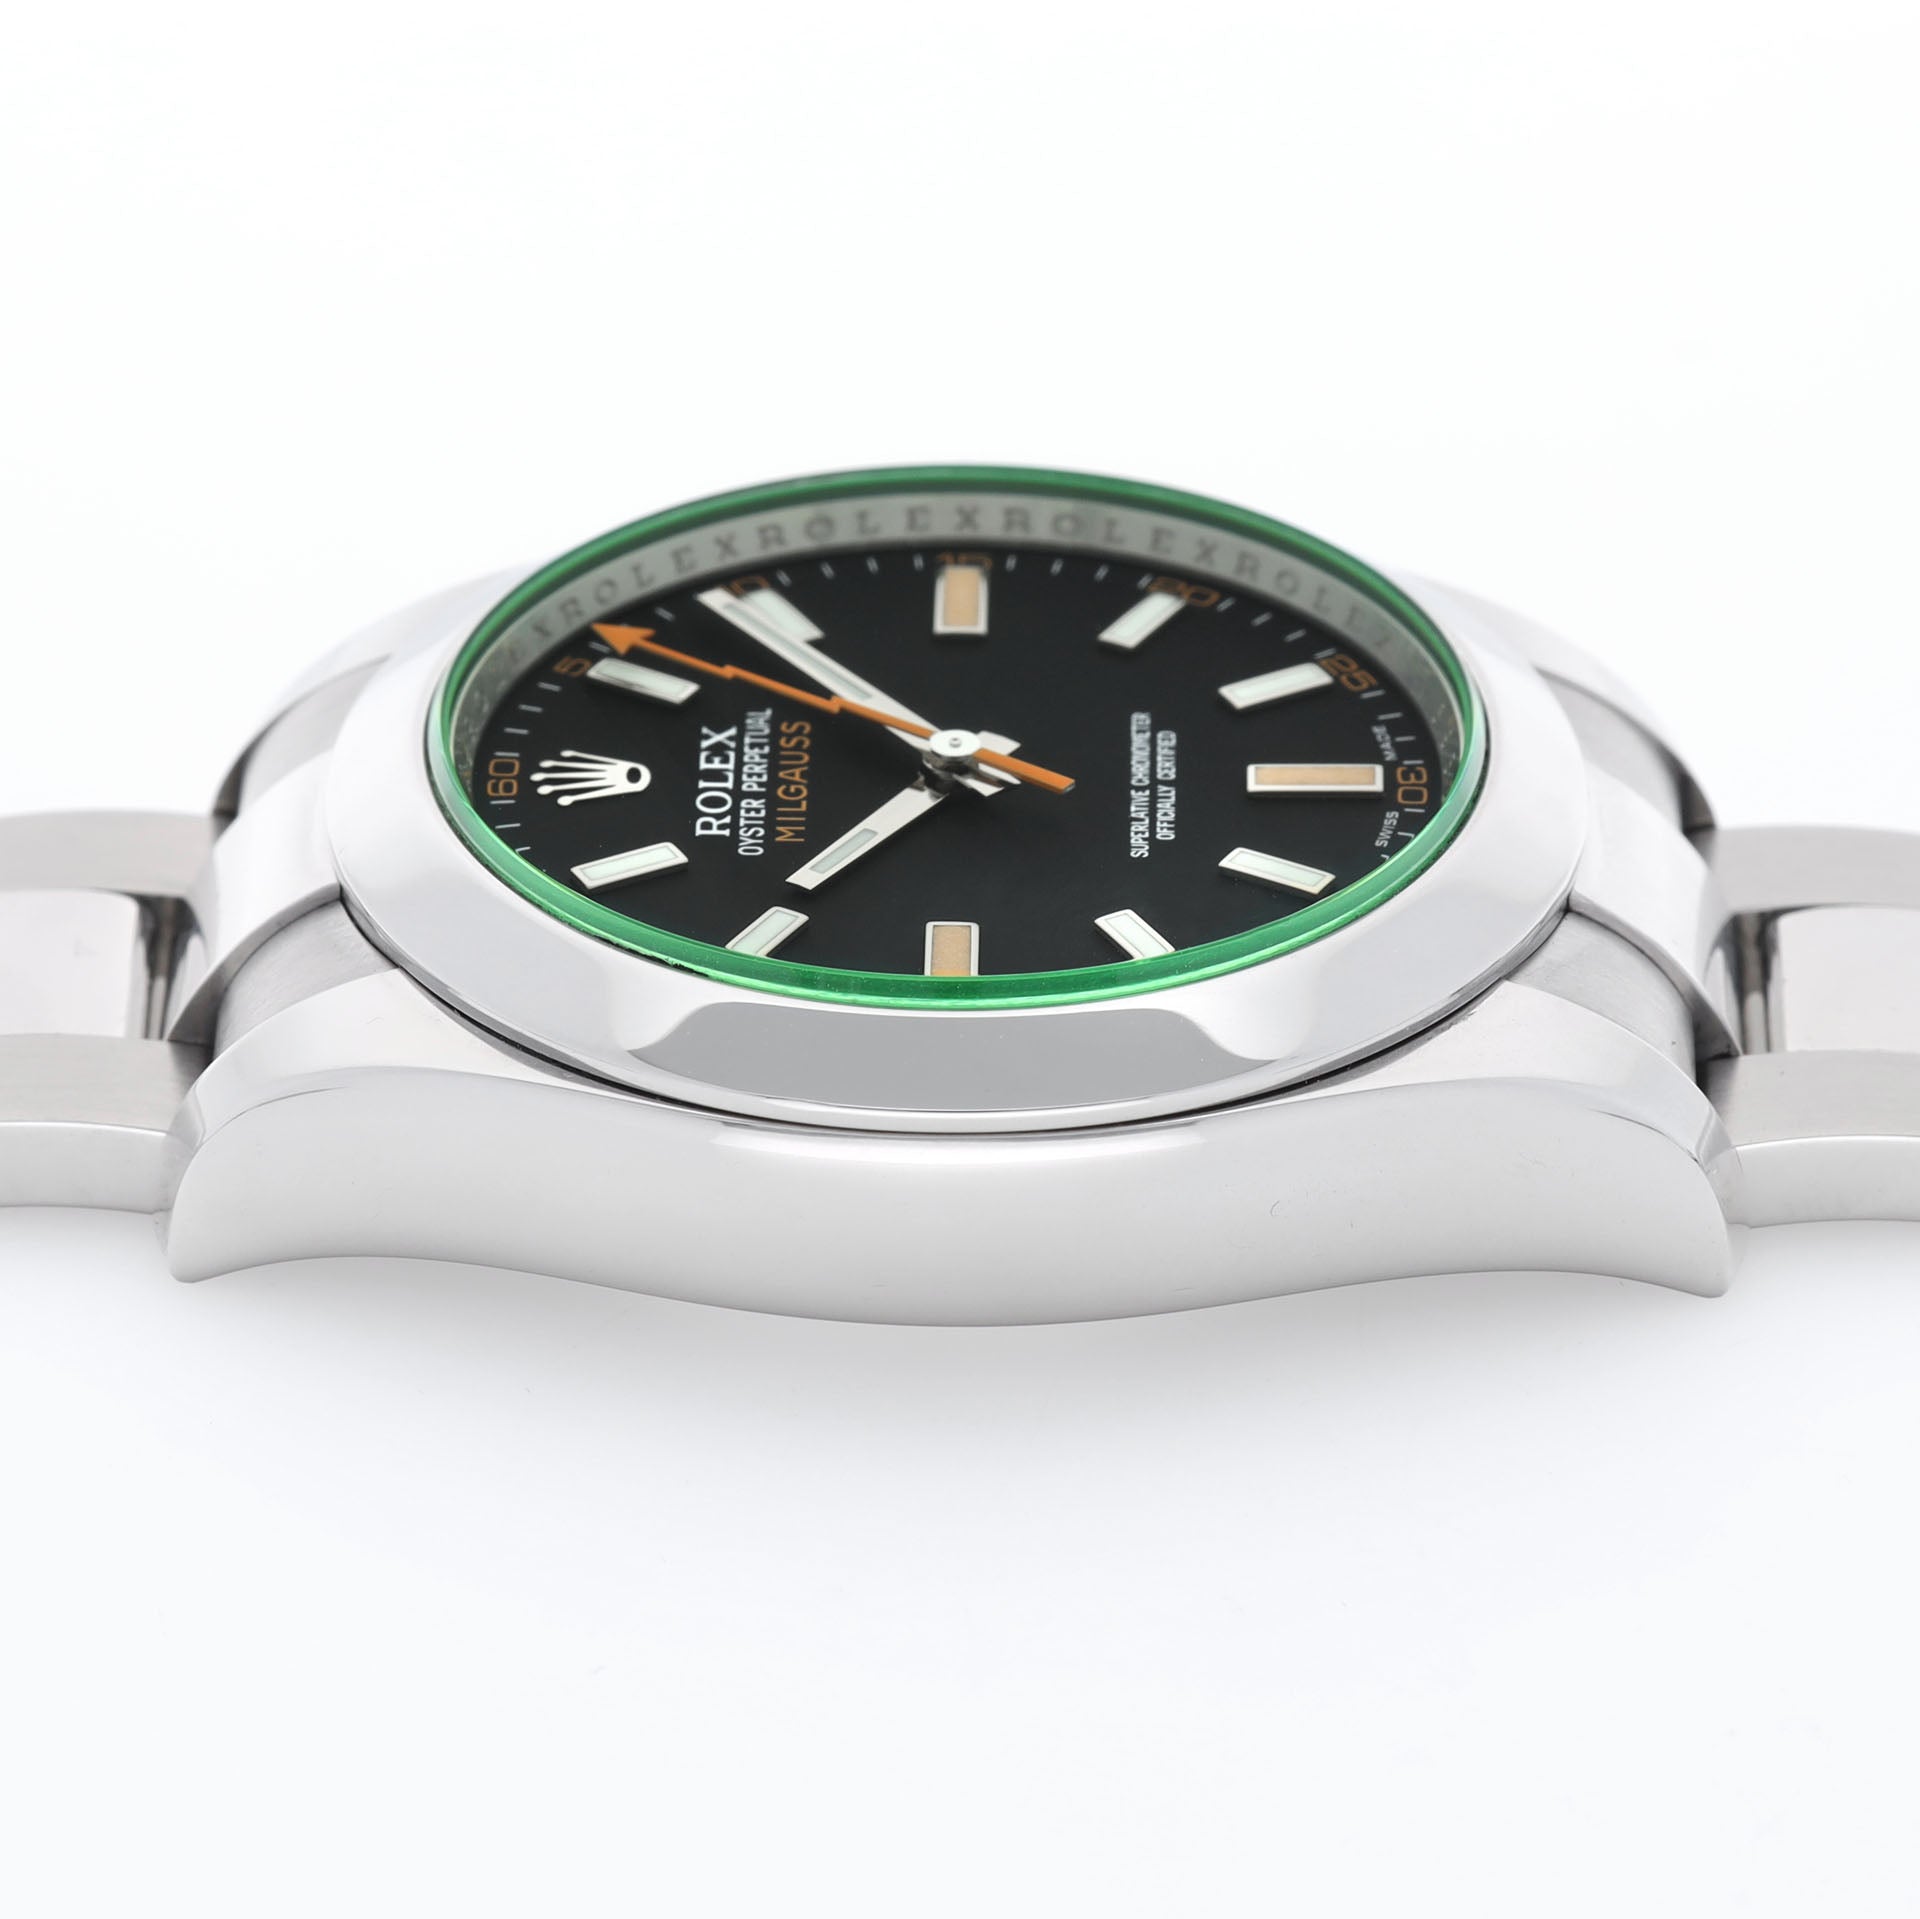 Rolex Milgauss 116400GV Black Dial Green Glass Box and Papers